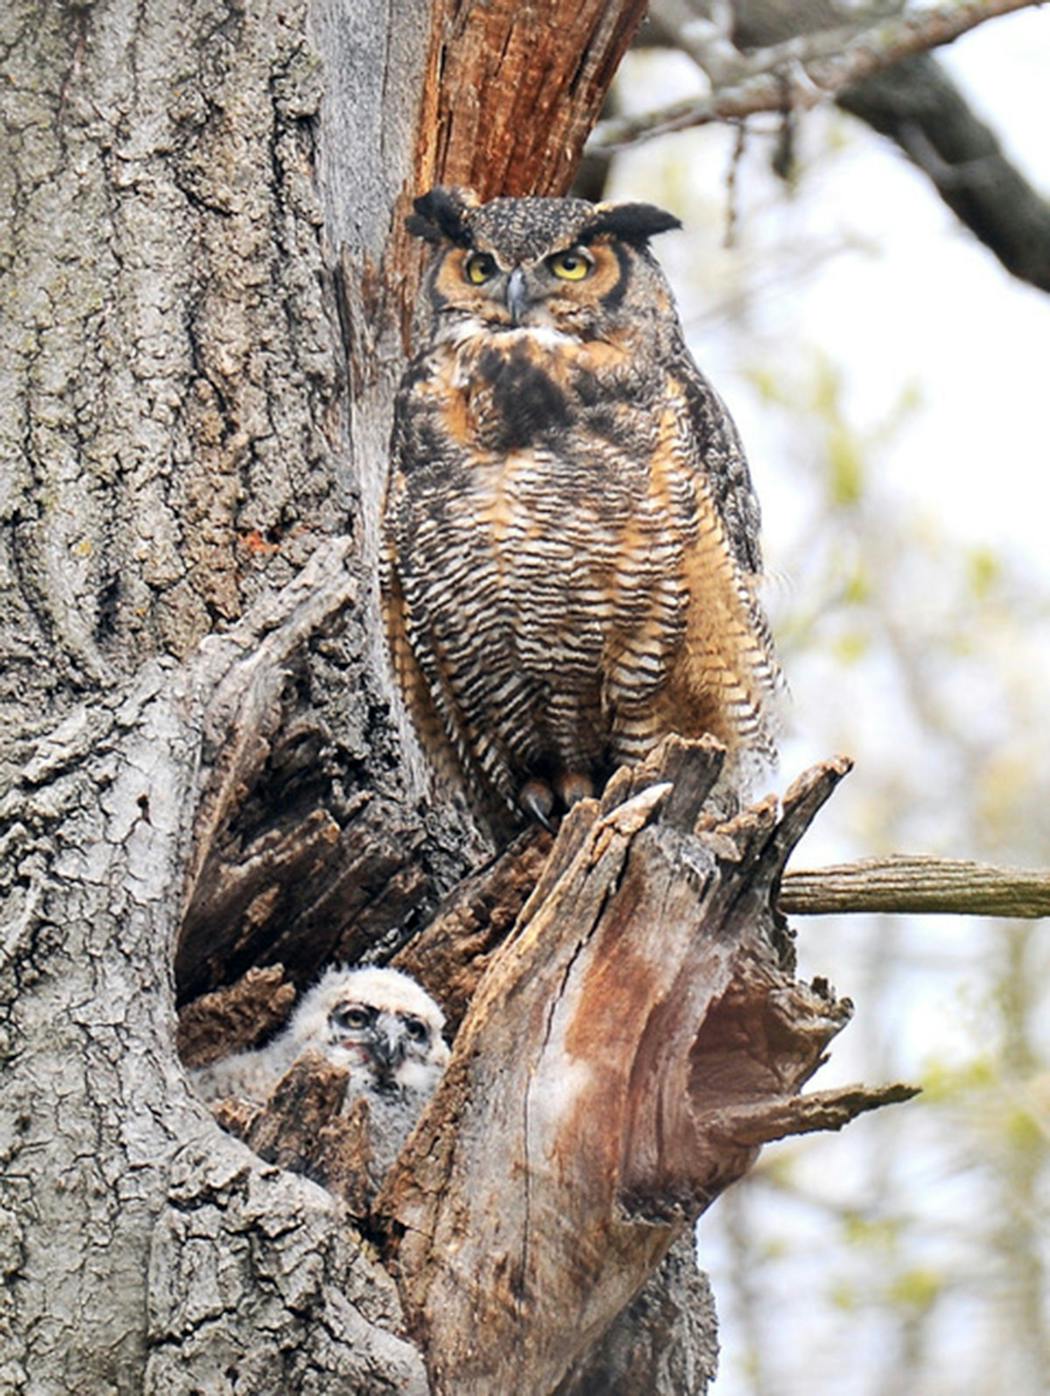 A great horned owl family at their nest.